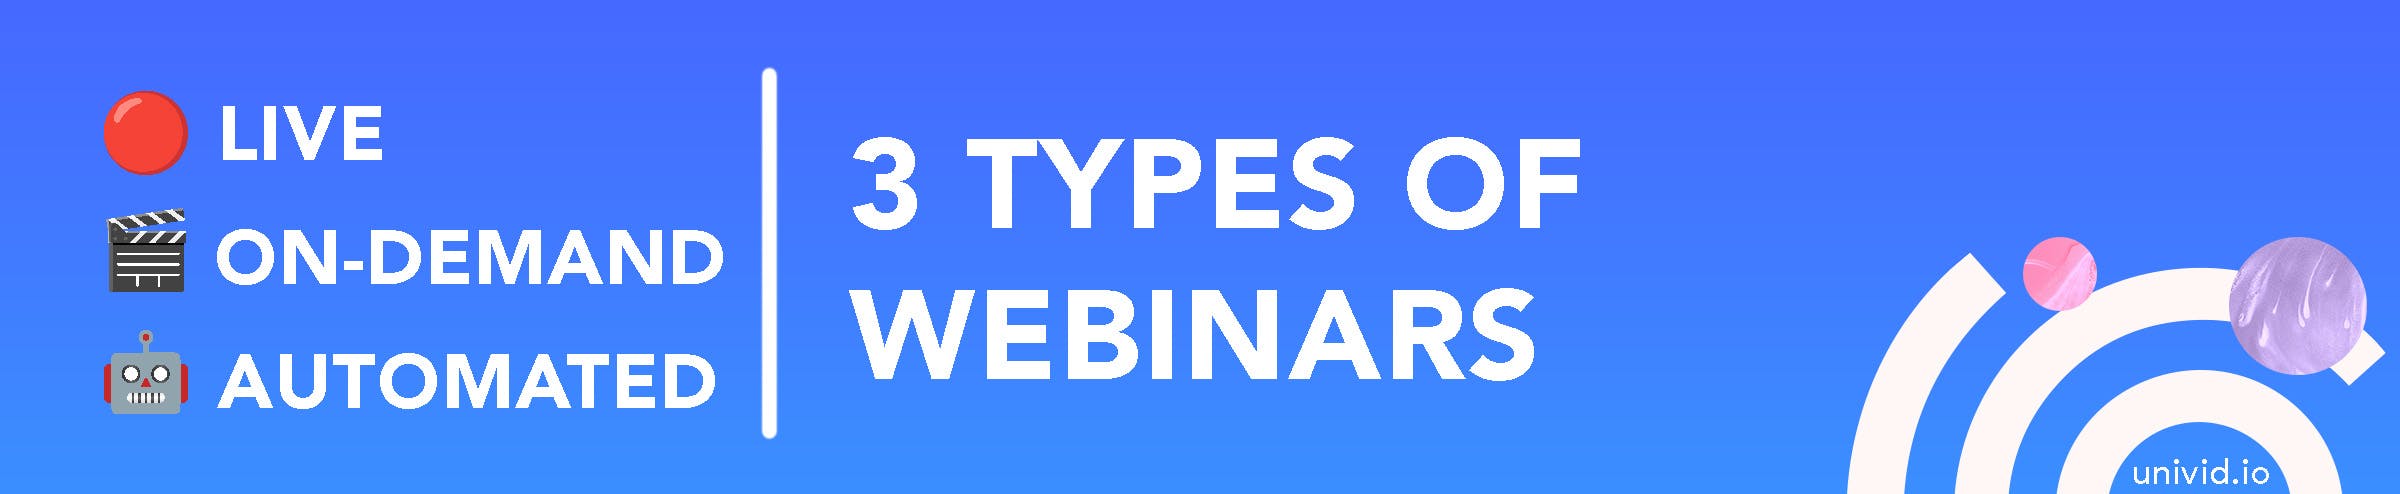 Types and formats of webinars. Live, on-demand and automated.